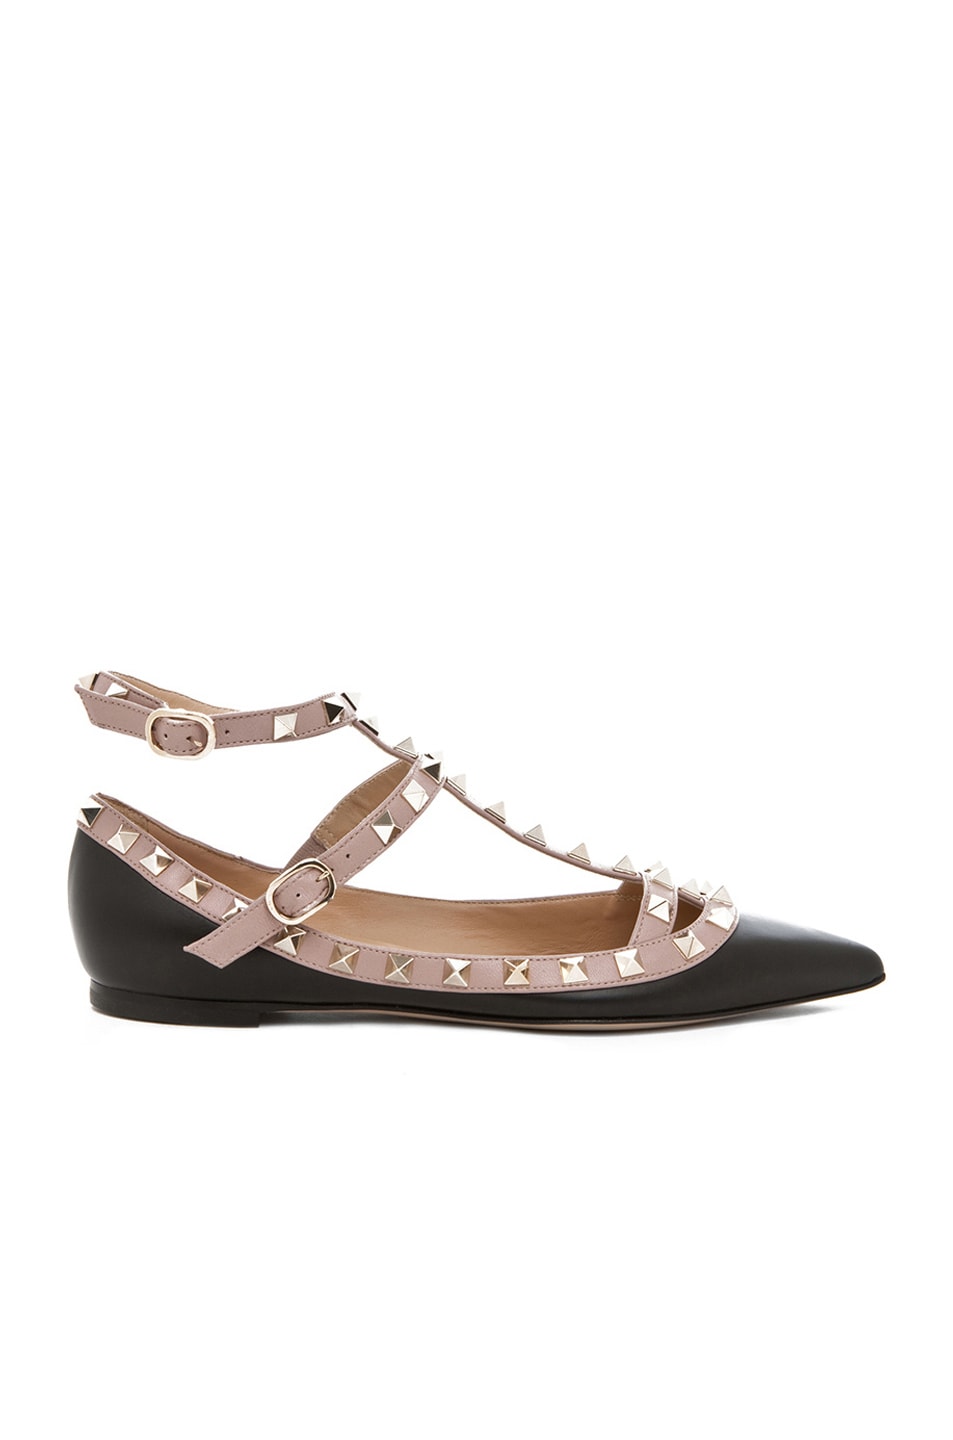 Valentino Rockstud Leather Cage Flats in Black | FWRD